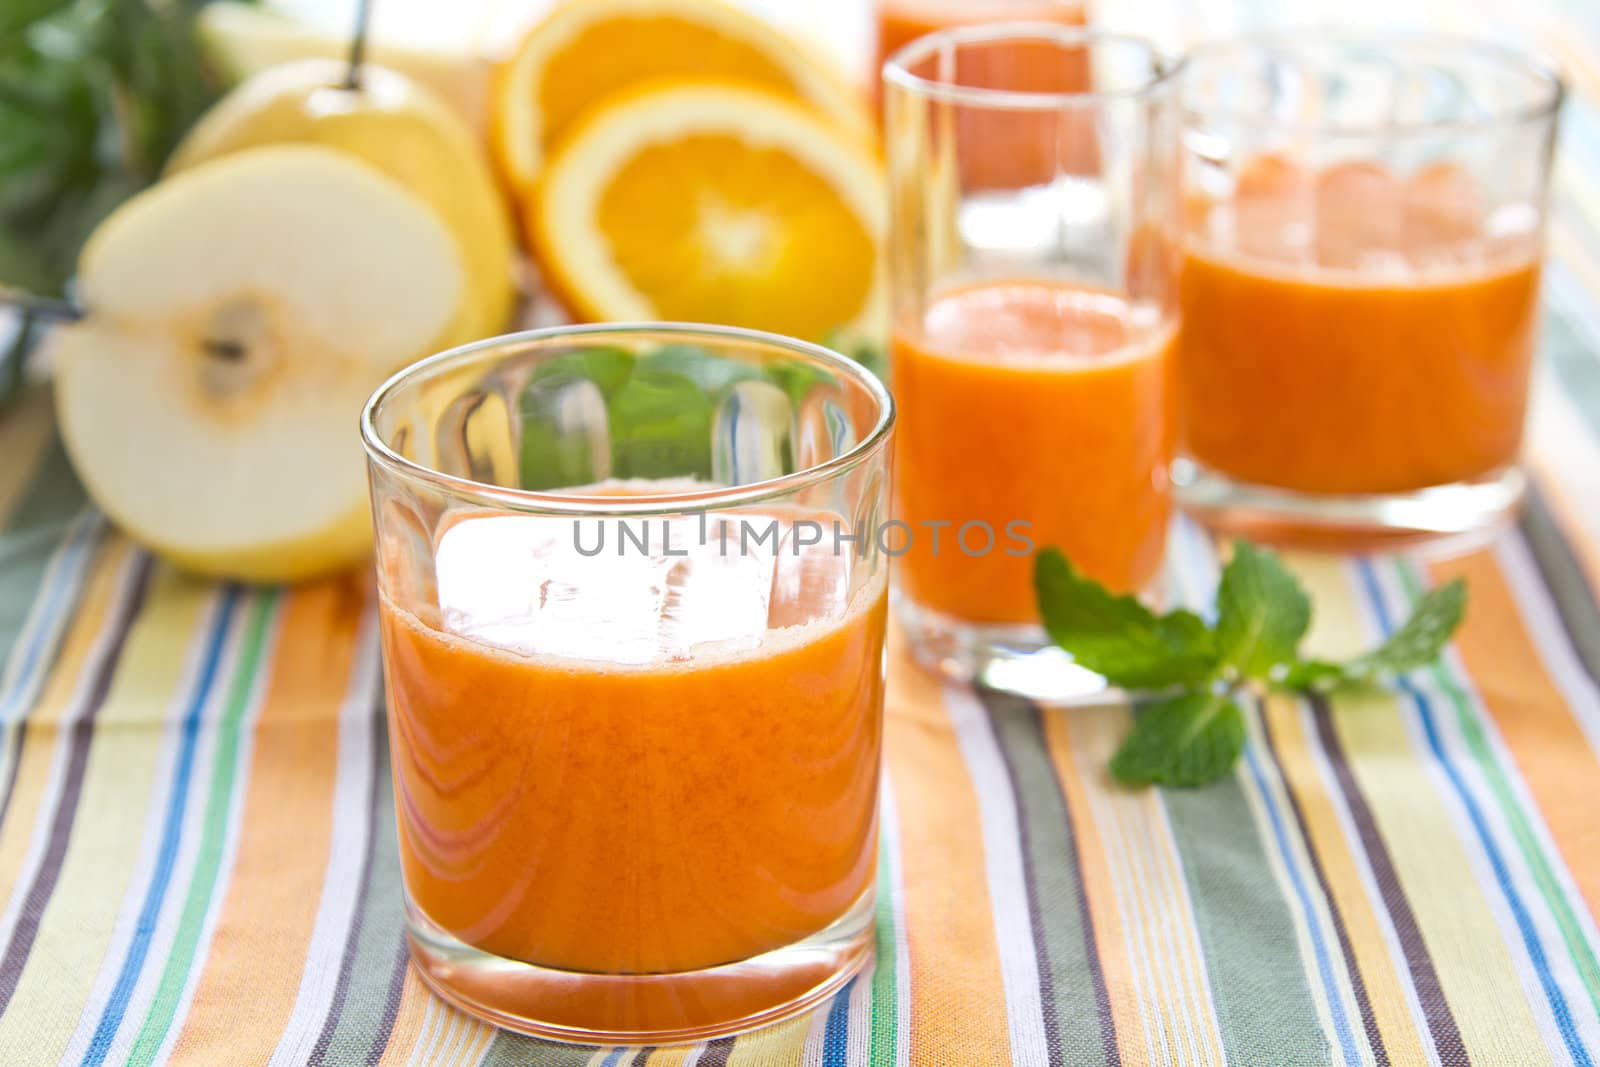 Pear,Orange,Carrot and Pineapple smoothie